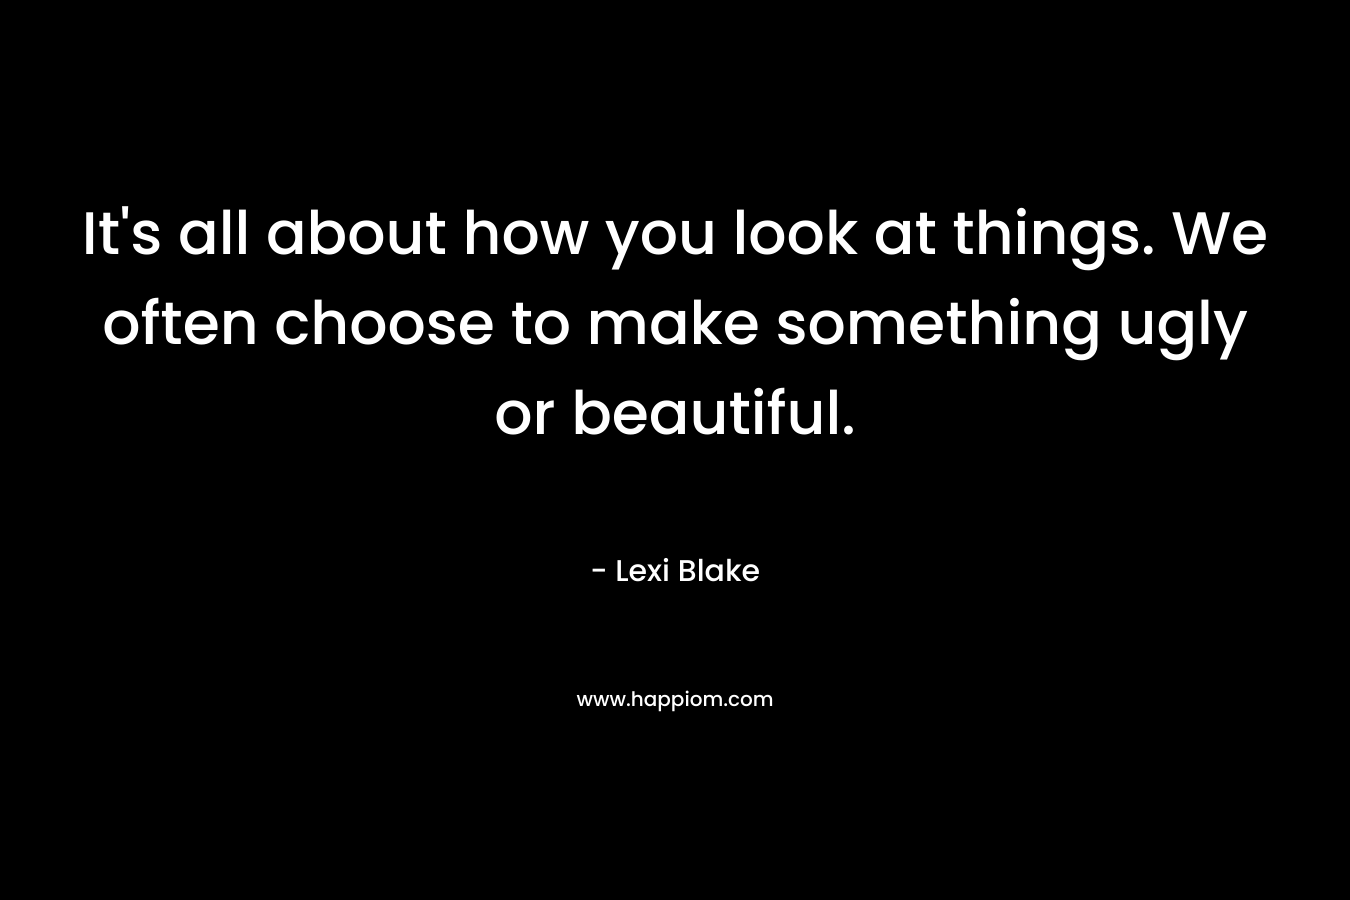 It's all about how you look at things. We often choose to make something ugly or beautiful.